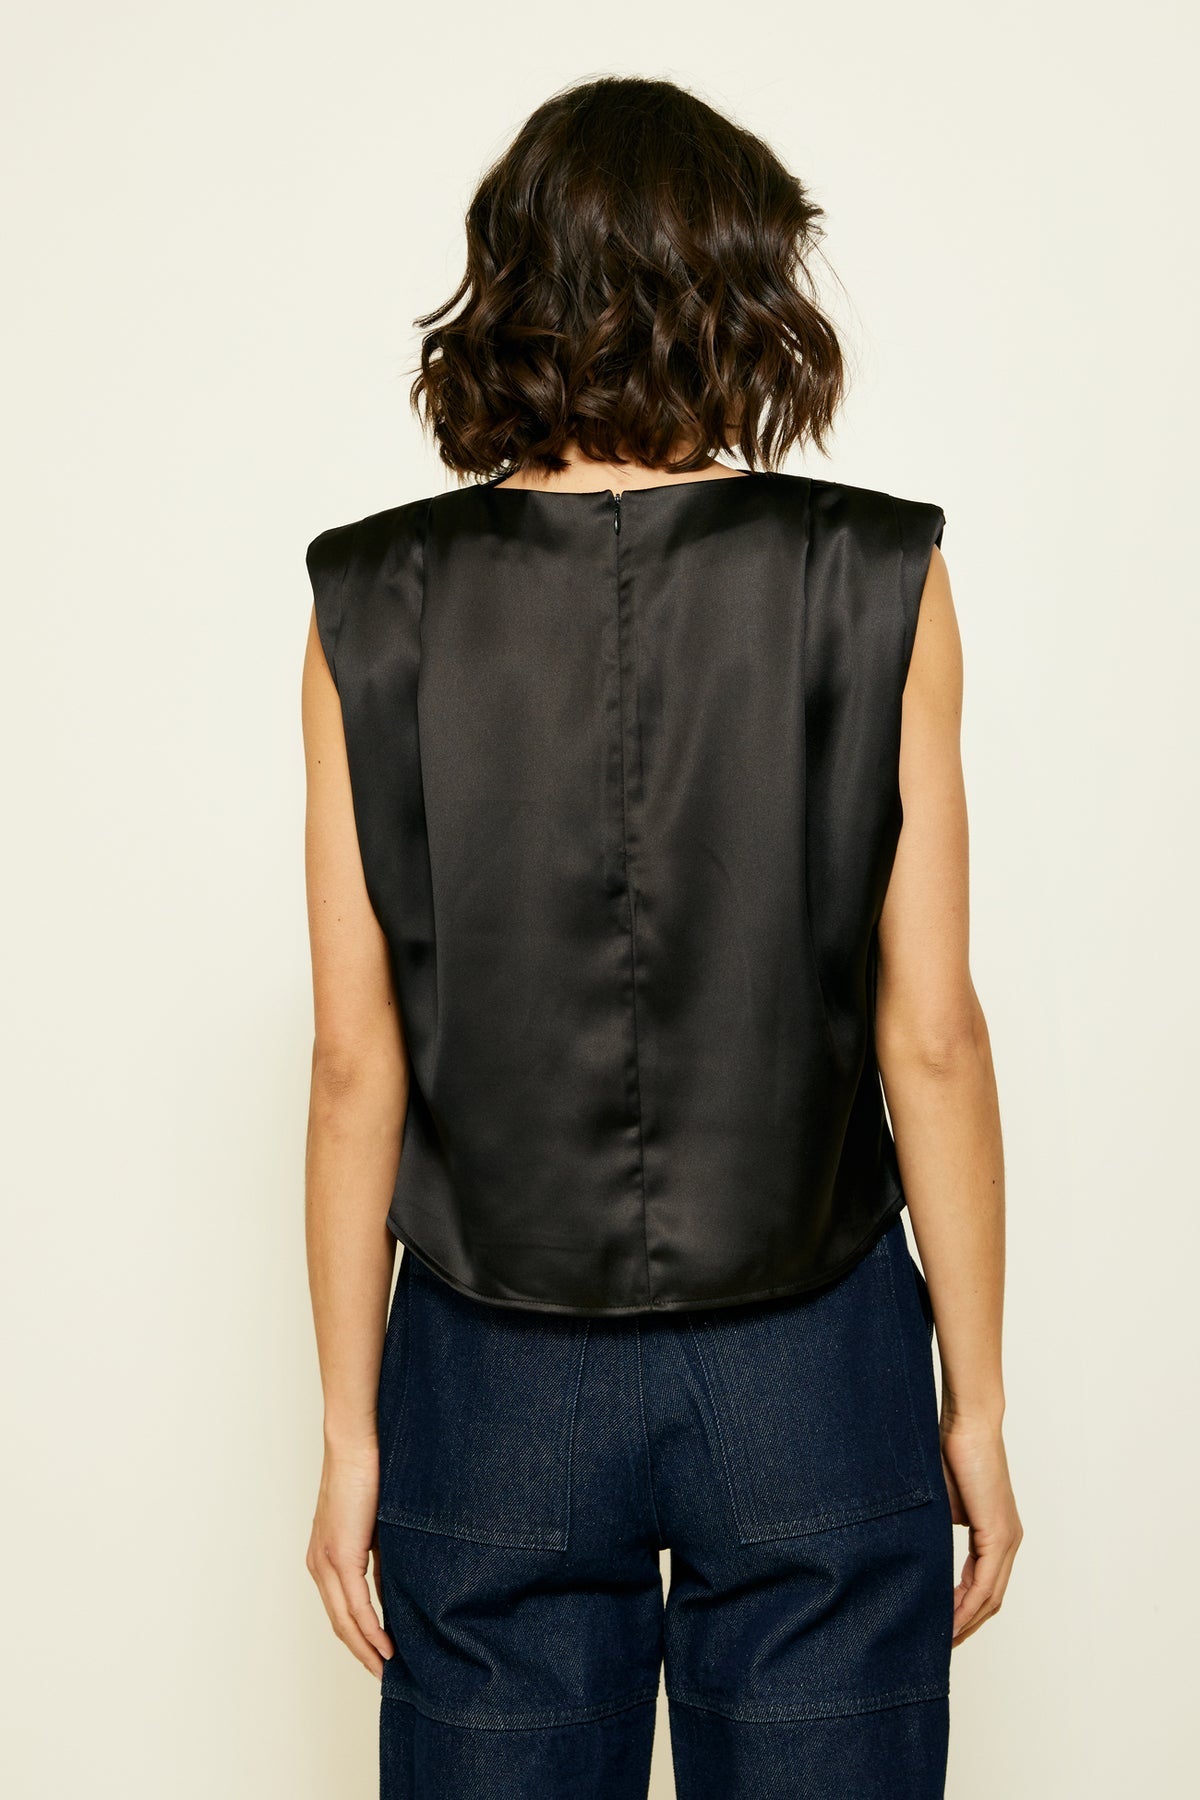 Dreamer Sleeveless Top - Something about Sofia